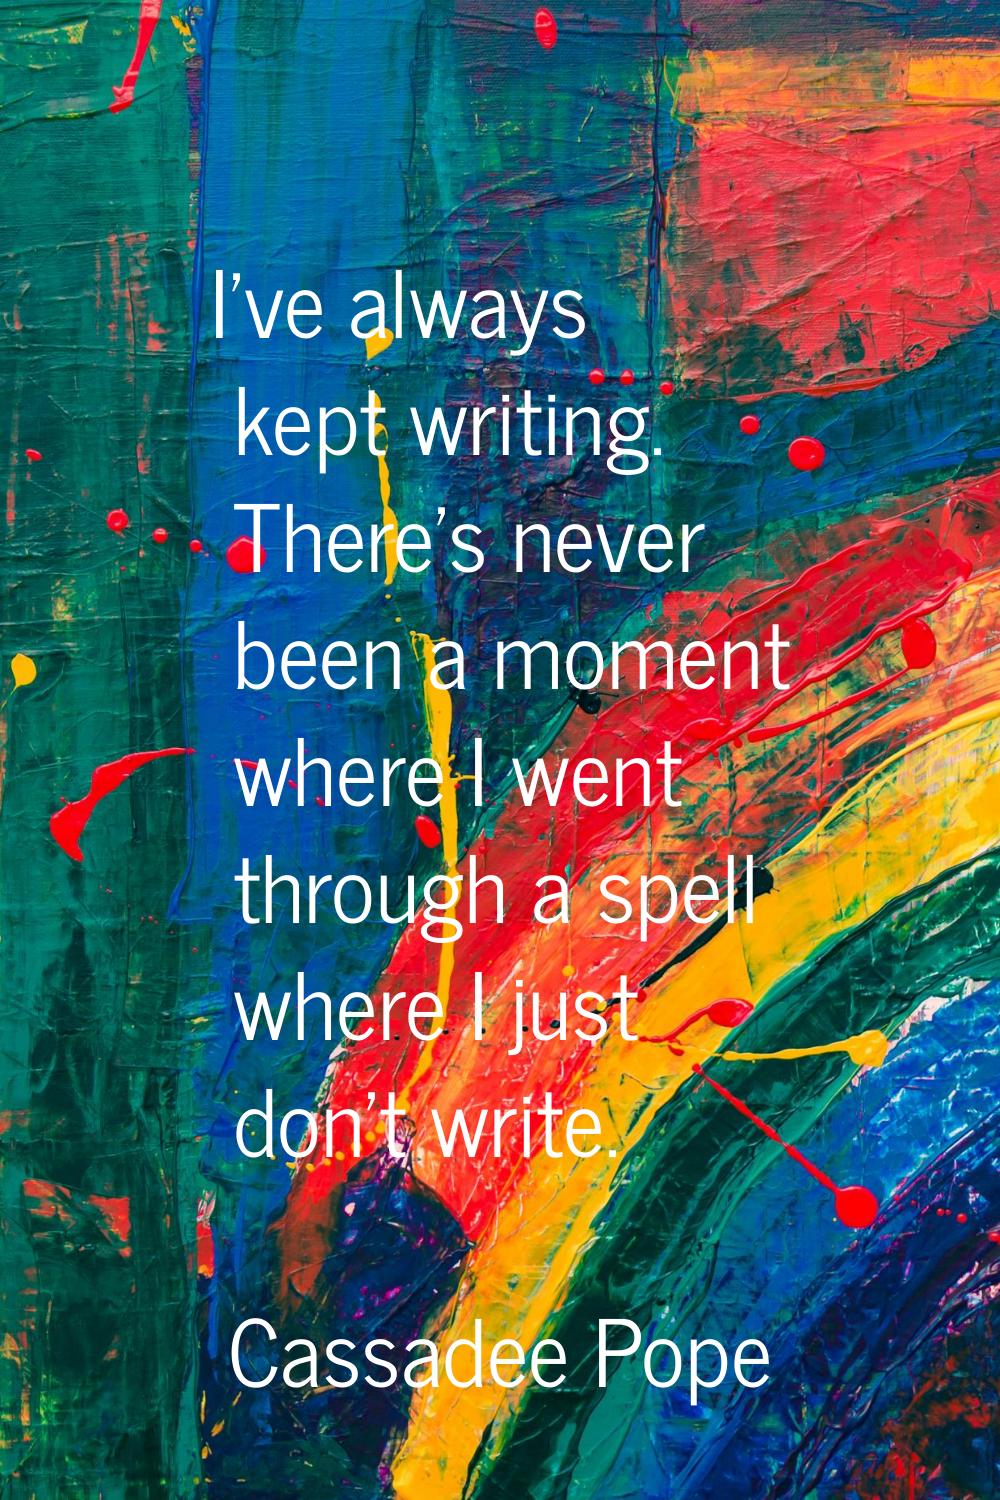 I've always kept writing. There's never been a moment where I went through a spell where I just don